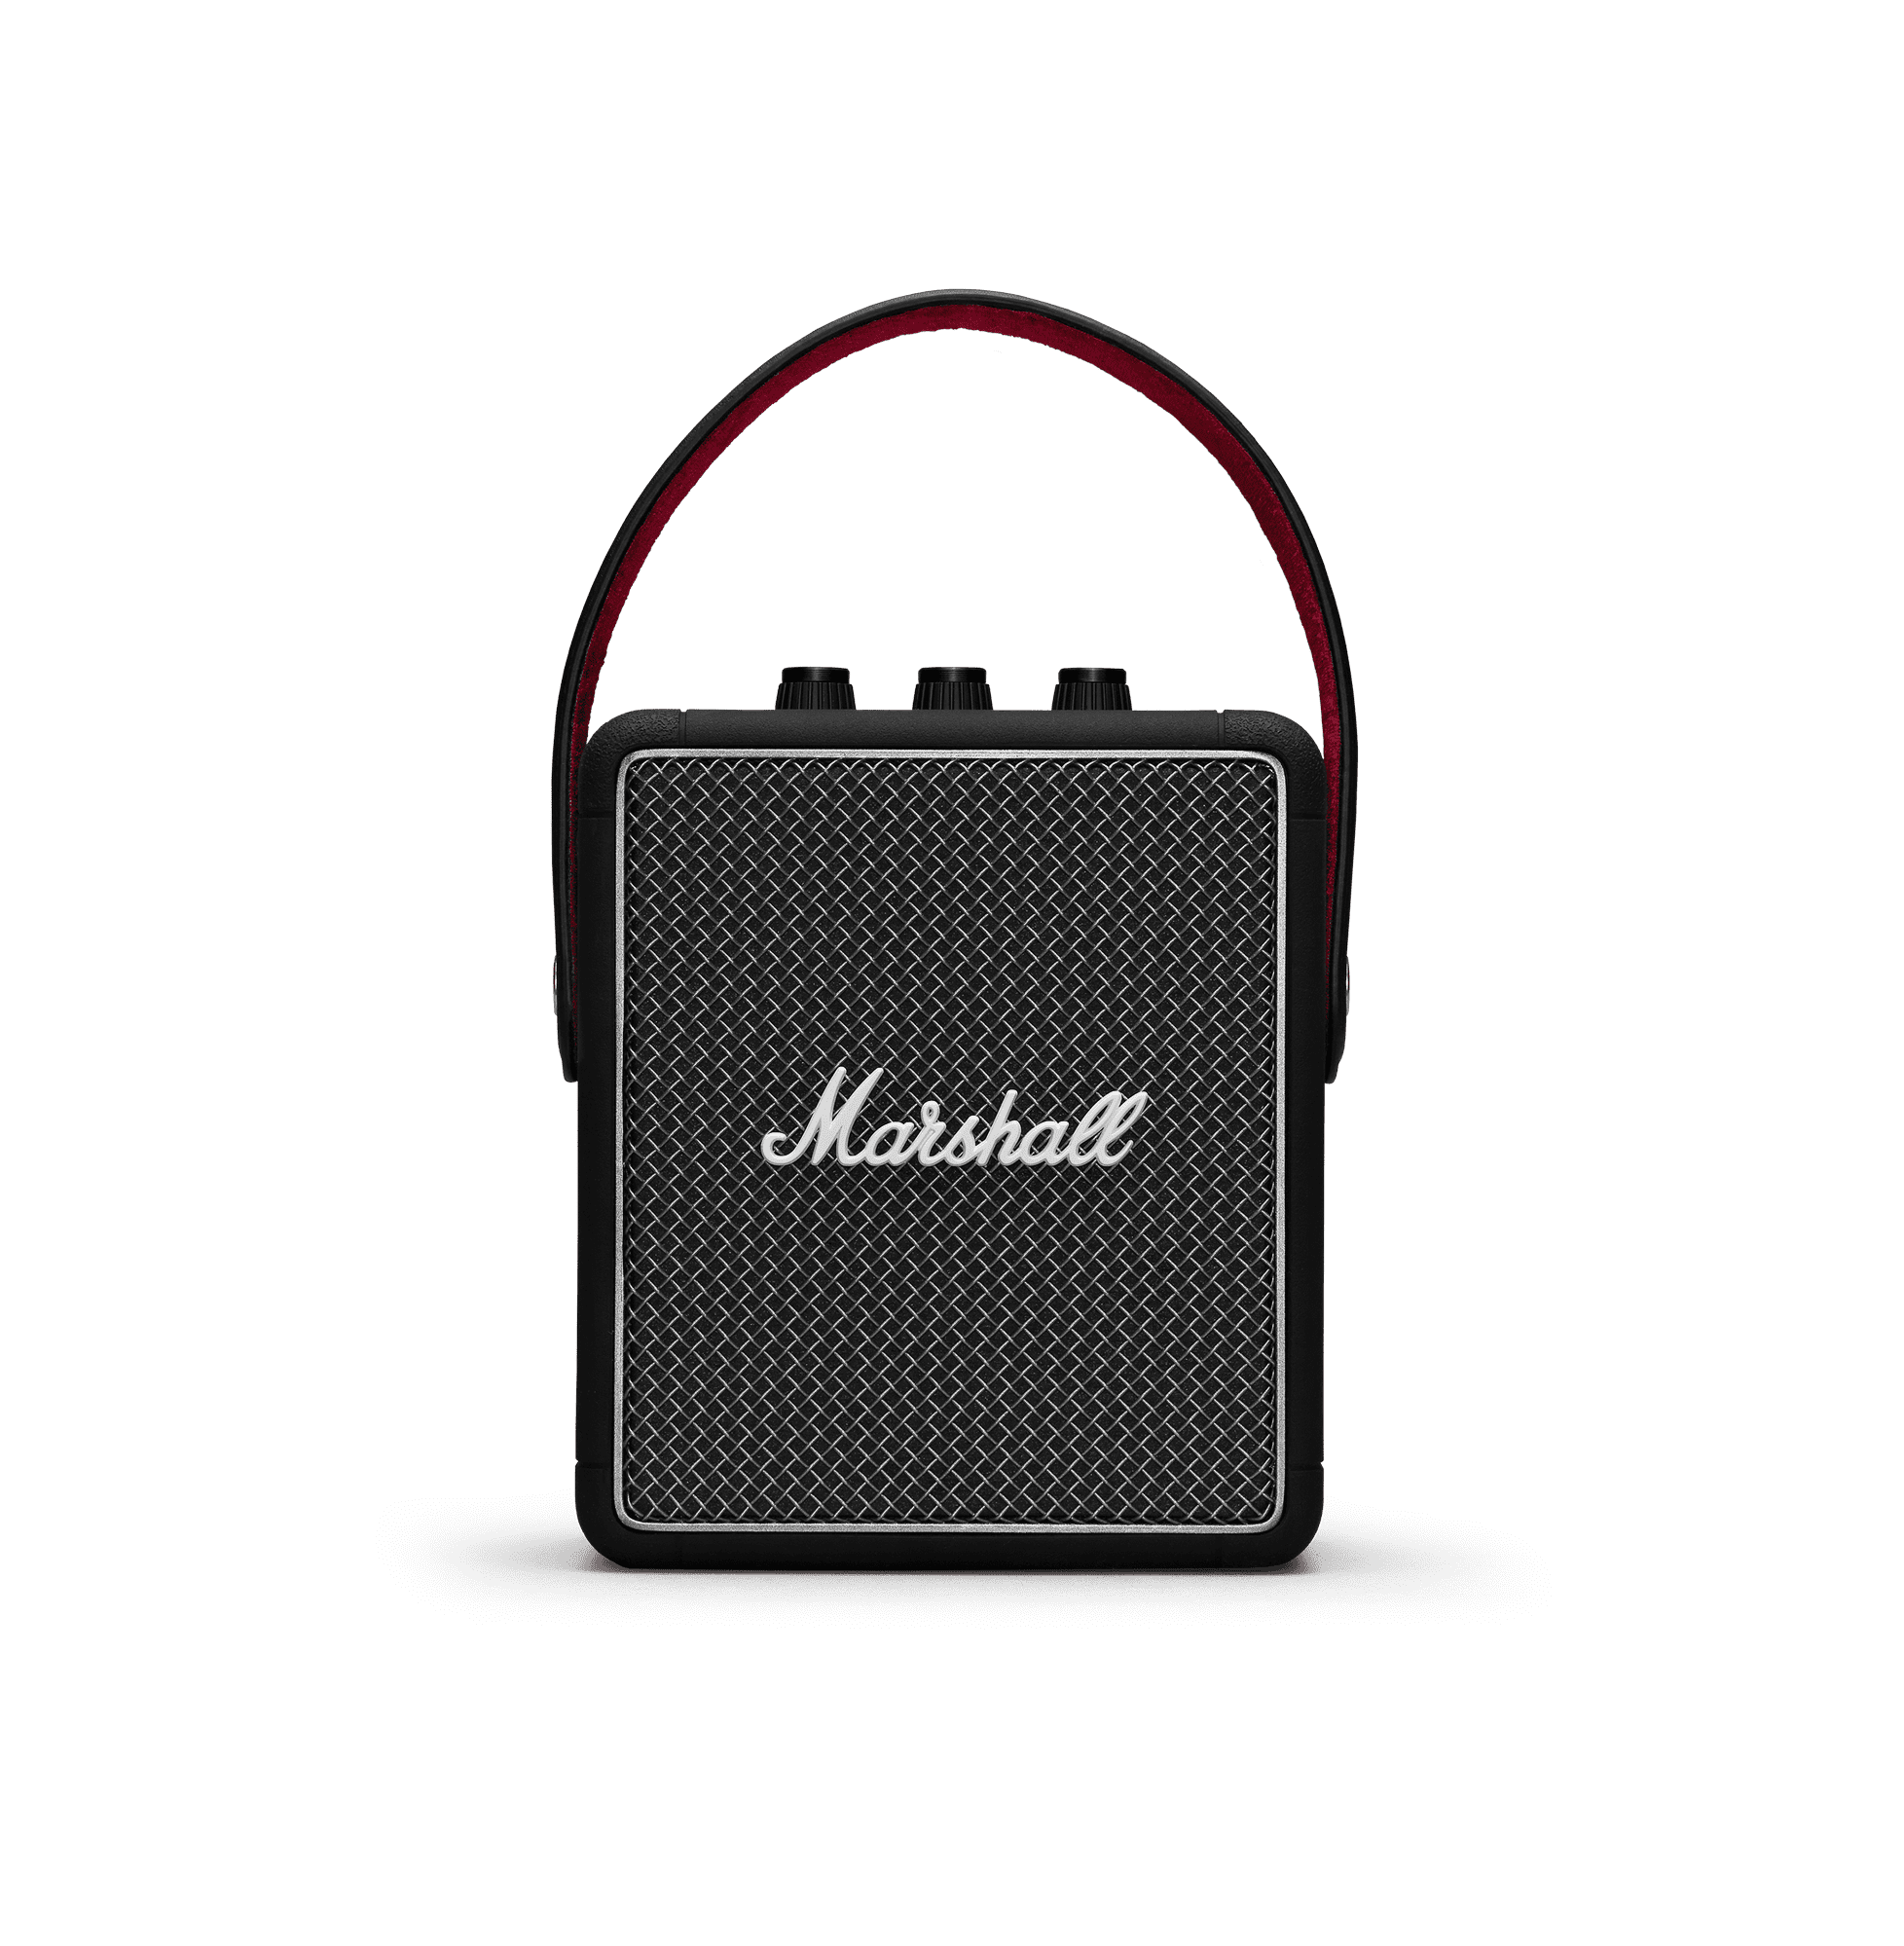 Stockwell II - Small but mighty portable speaker